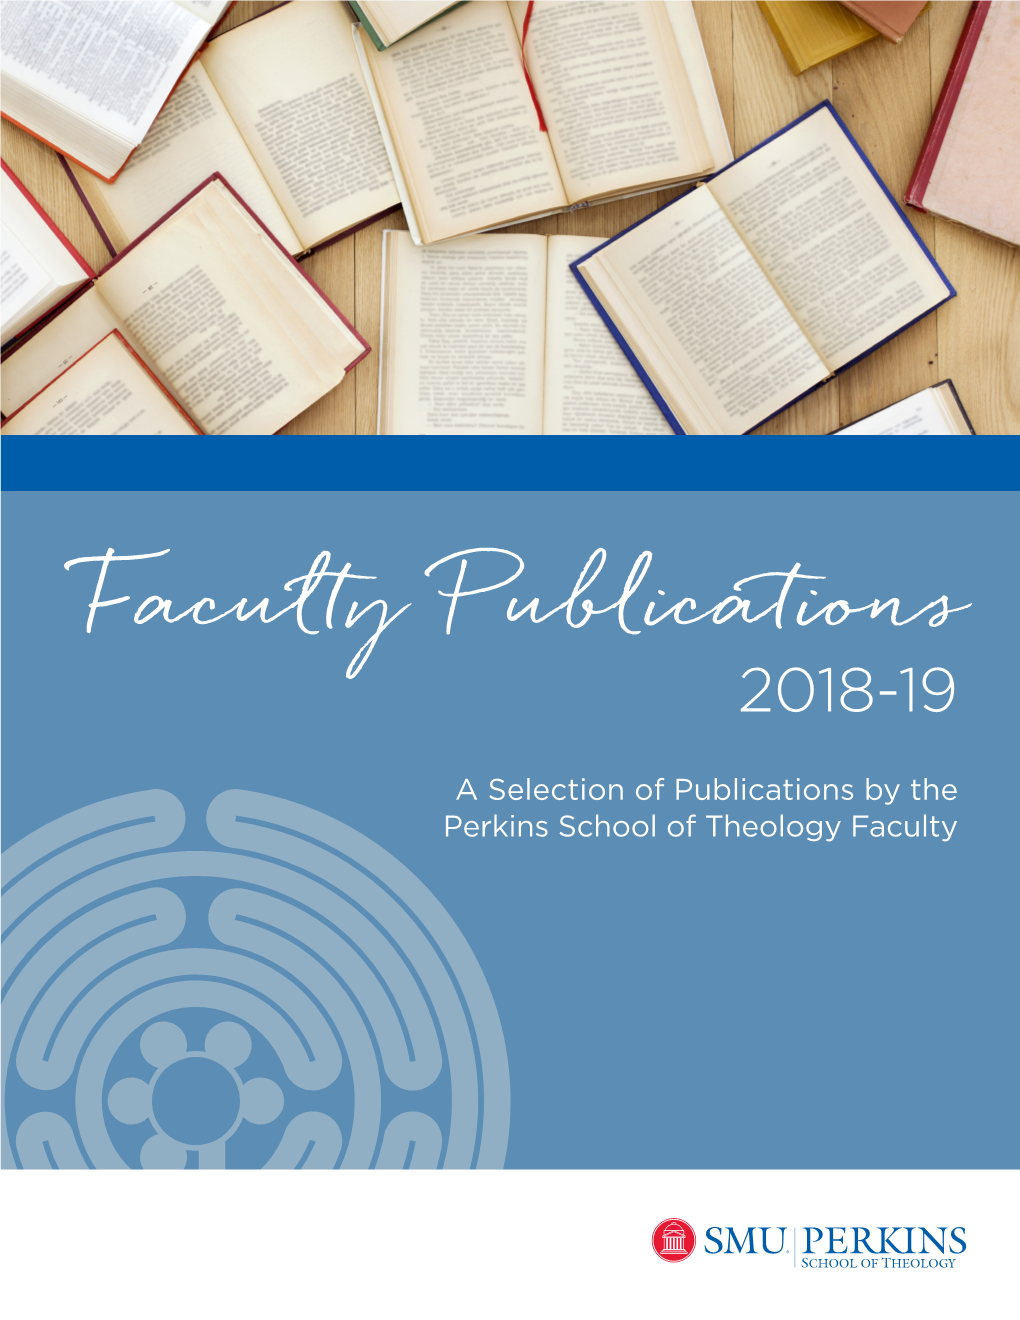 Faculty Publications 2018-19